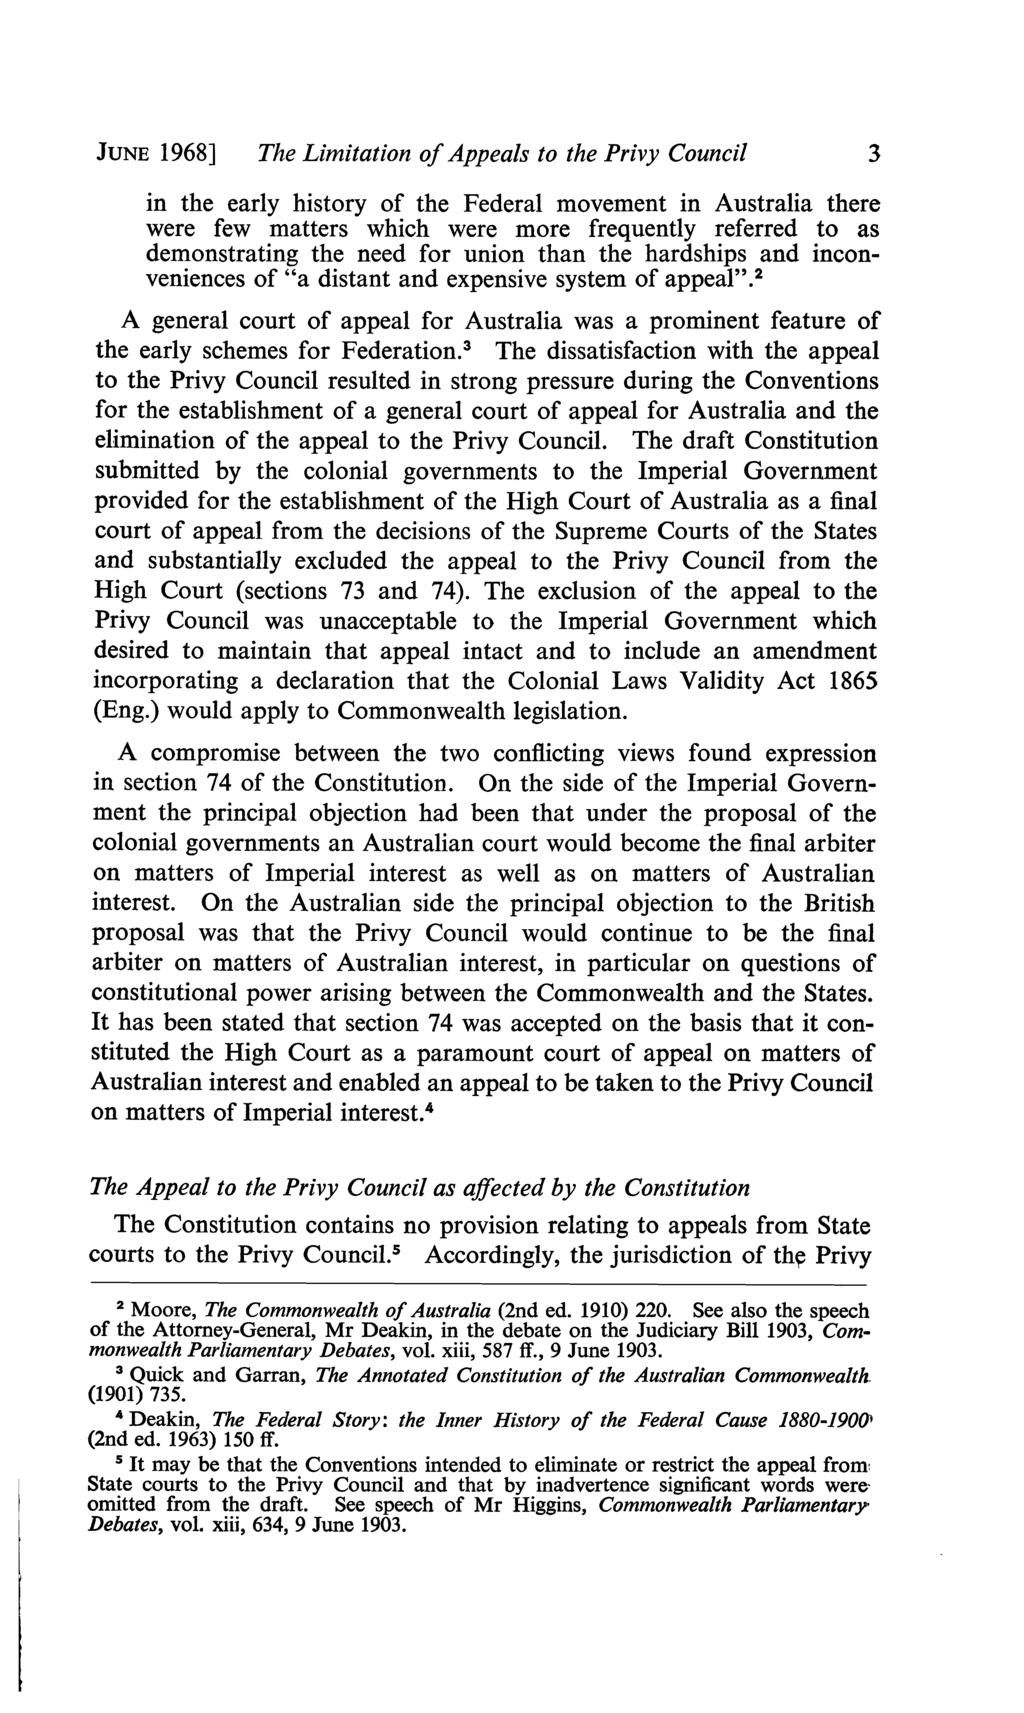 JUNE 1968] The Limitation of Appeals to the Privy Council 3 in the early history of the Federal movement in Australia there were few matters which were more frequently referred to as demonstrating